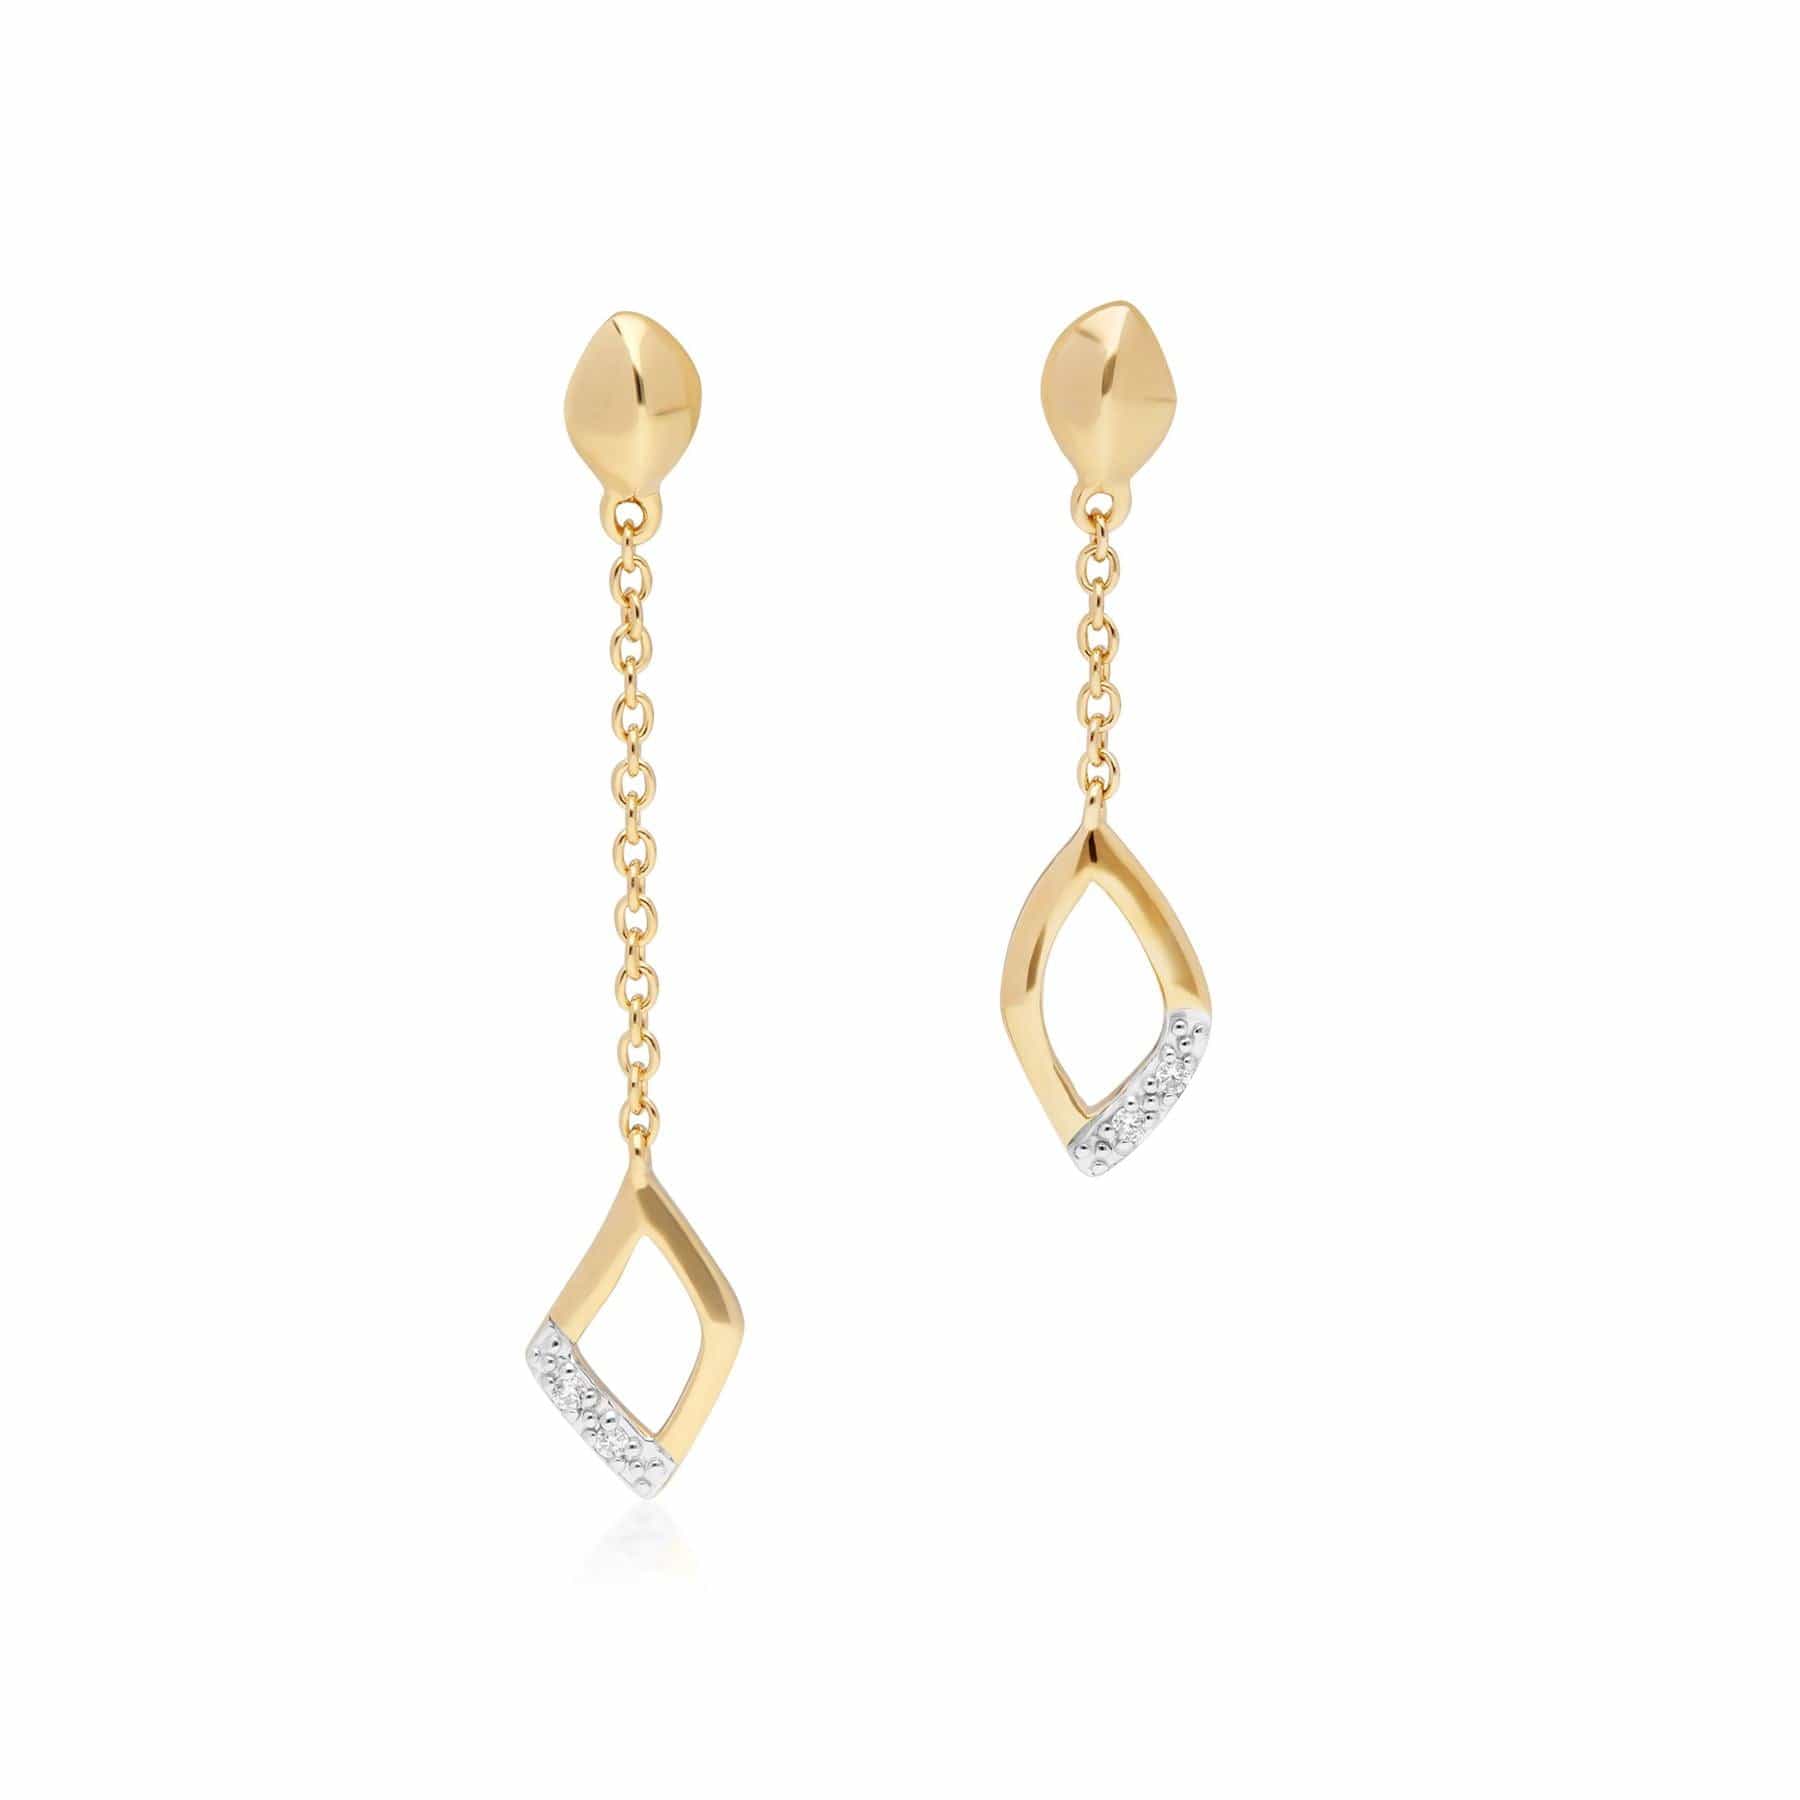 191E0393029 Mismatched Diamond Dangle Drop Earrings in 9ct Yellow Gold 1